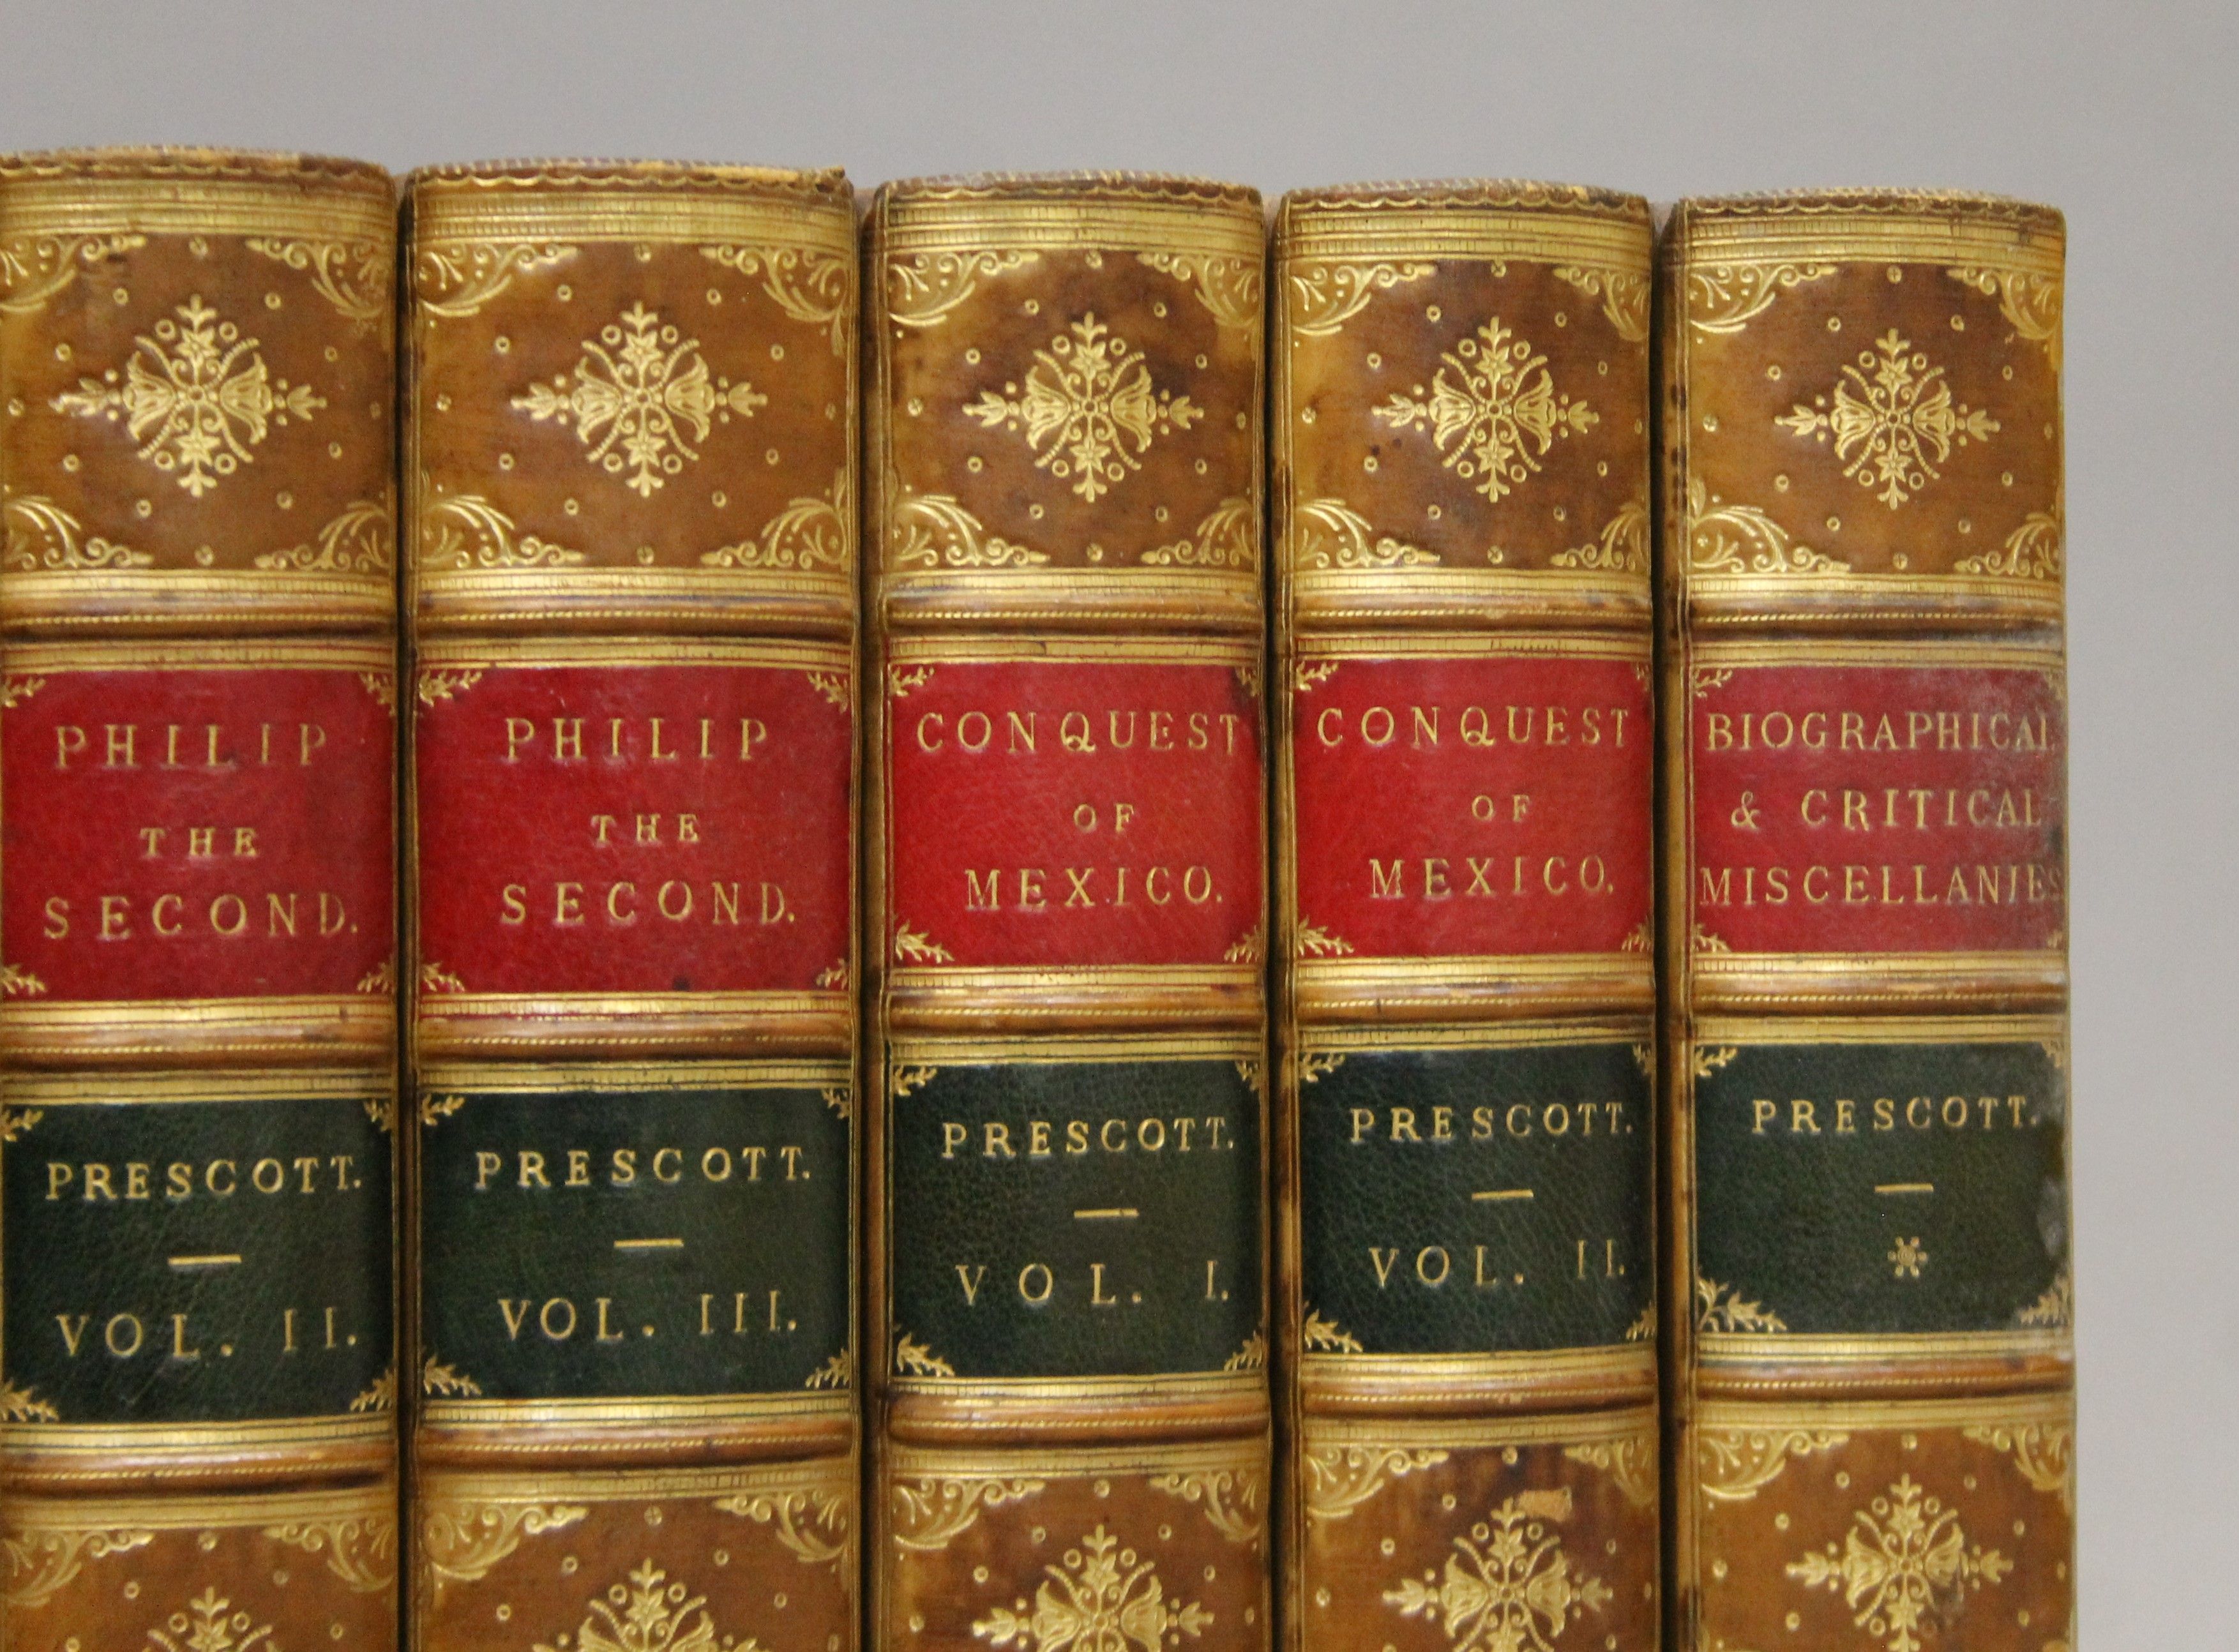 Prescott (William H), Works, 12 vols, finely bound in full brown calf, red and green labels, - Image 3 of 11